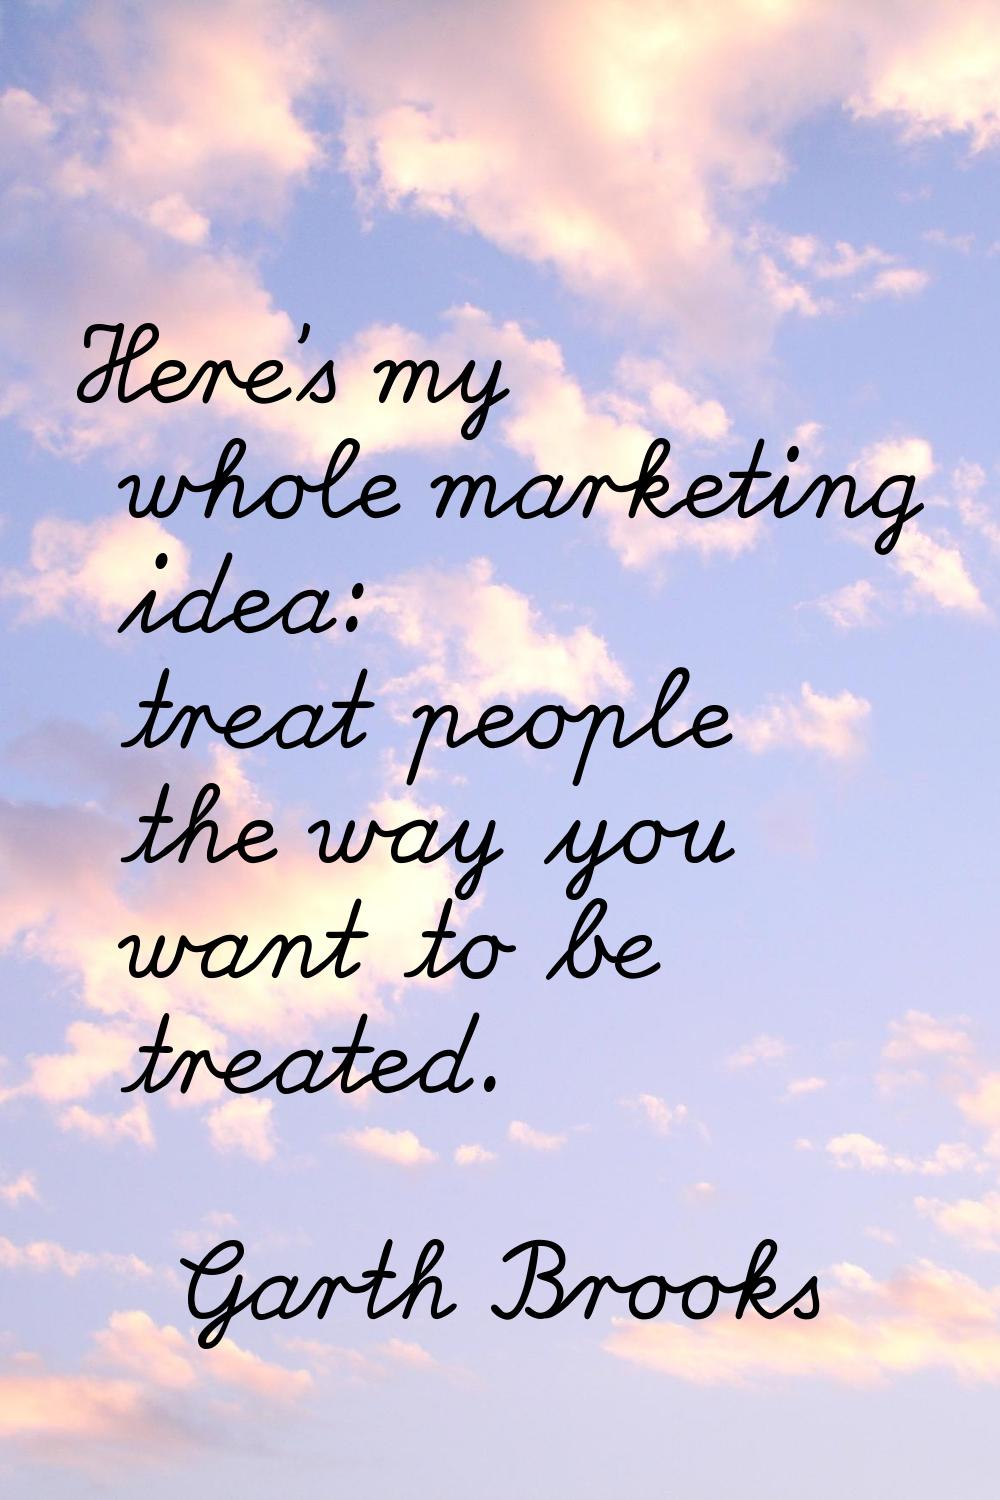 Here's my whole marketing idea: treat people the way you want to be treated.